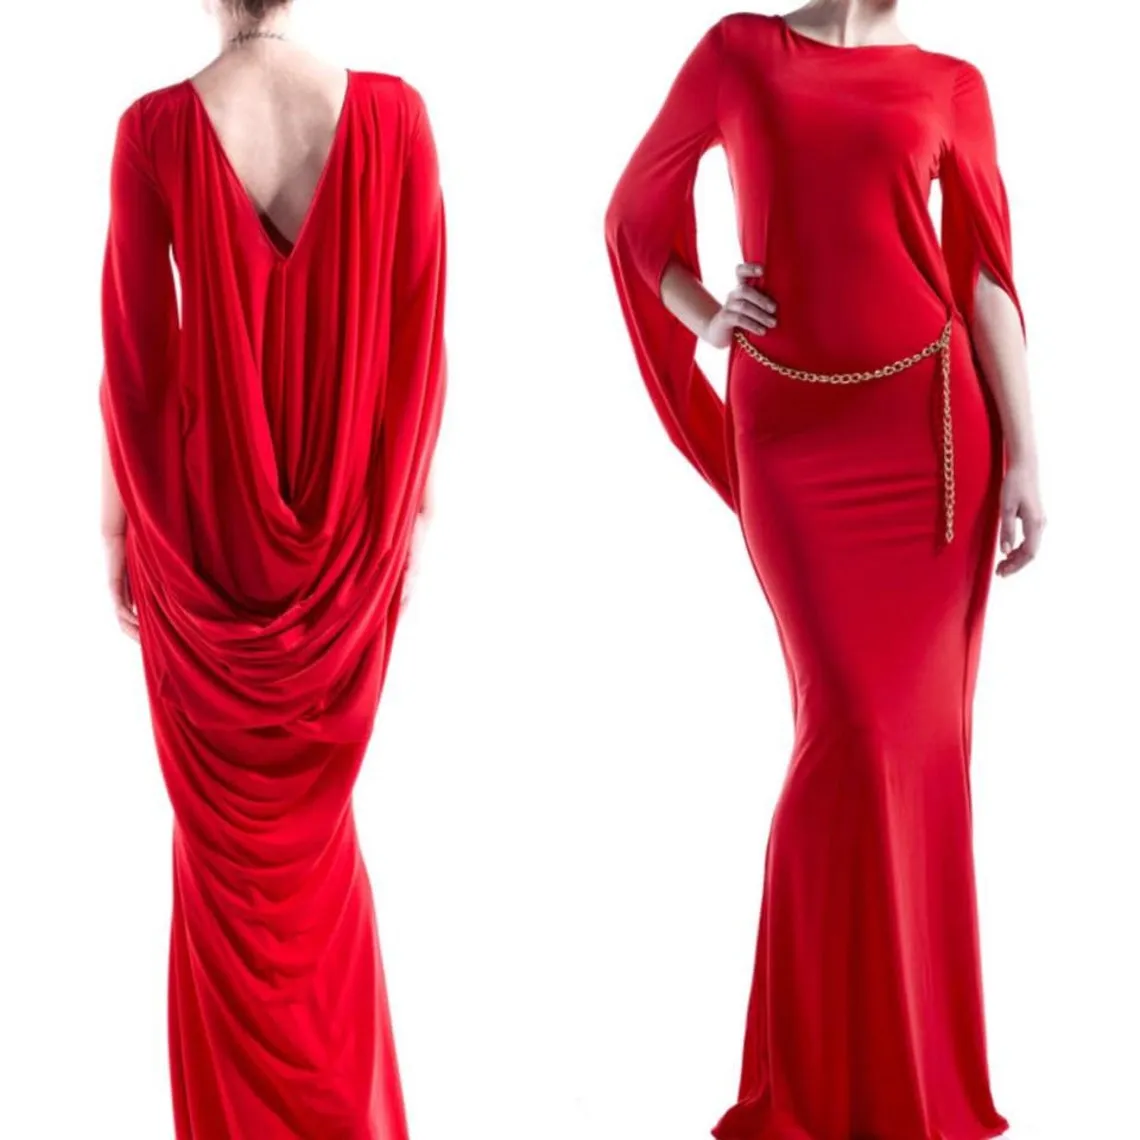 Sexy Open Back Red Evening Dresses For Women 2022 Spring Autumn Chic Ruched Long Sleeve Mermaid Prom Celebrity Party Gowns Floor Length Elegant Special Occasion Wear